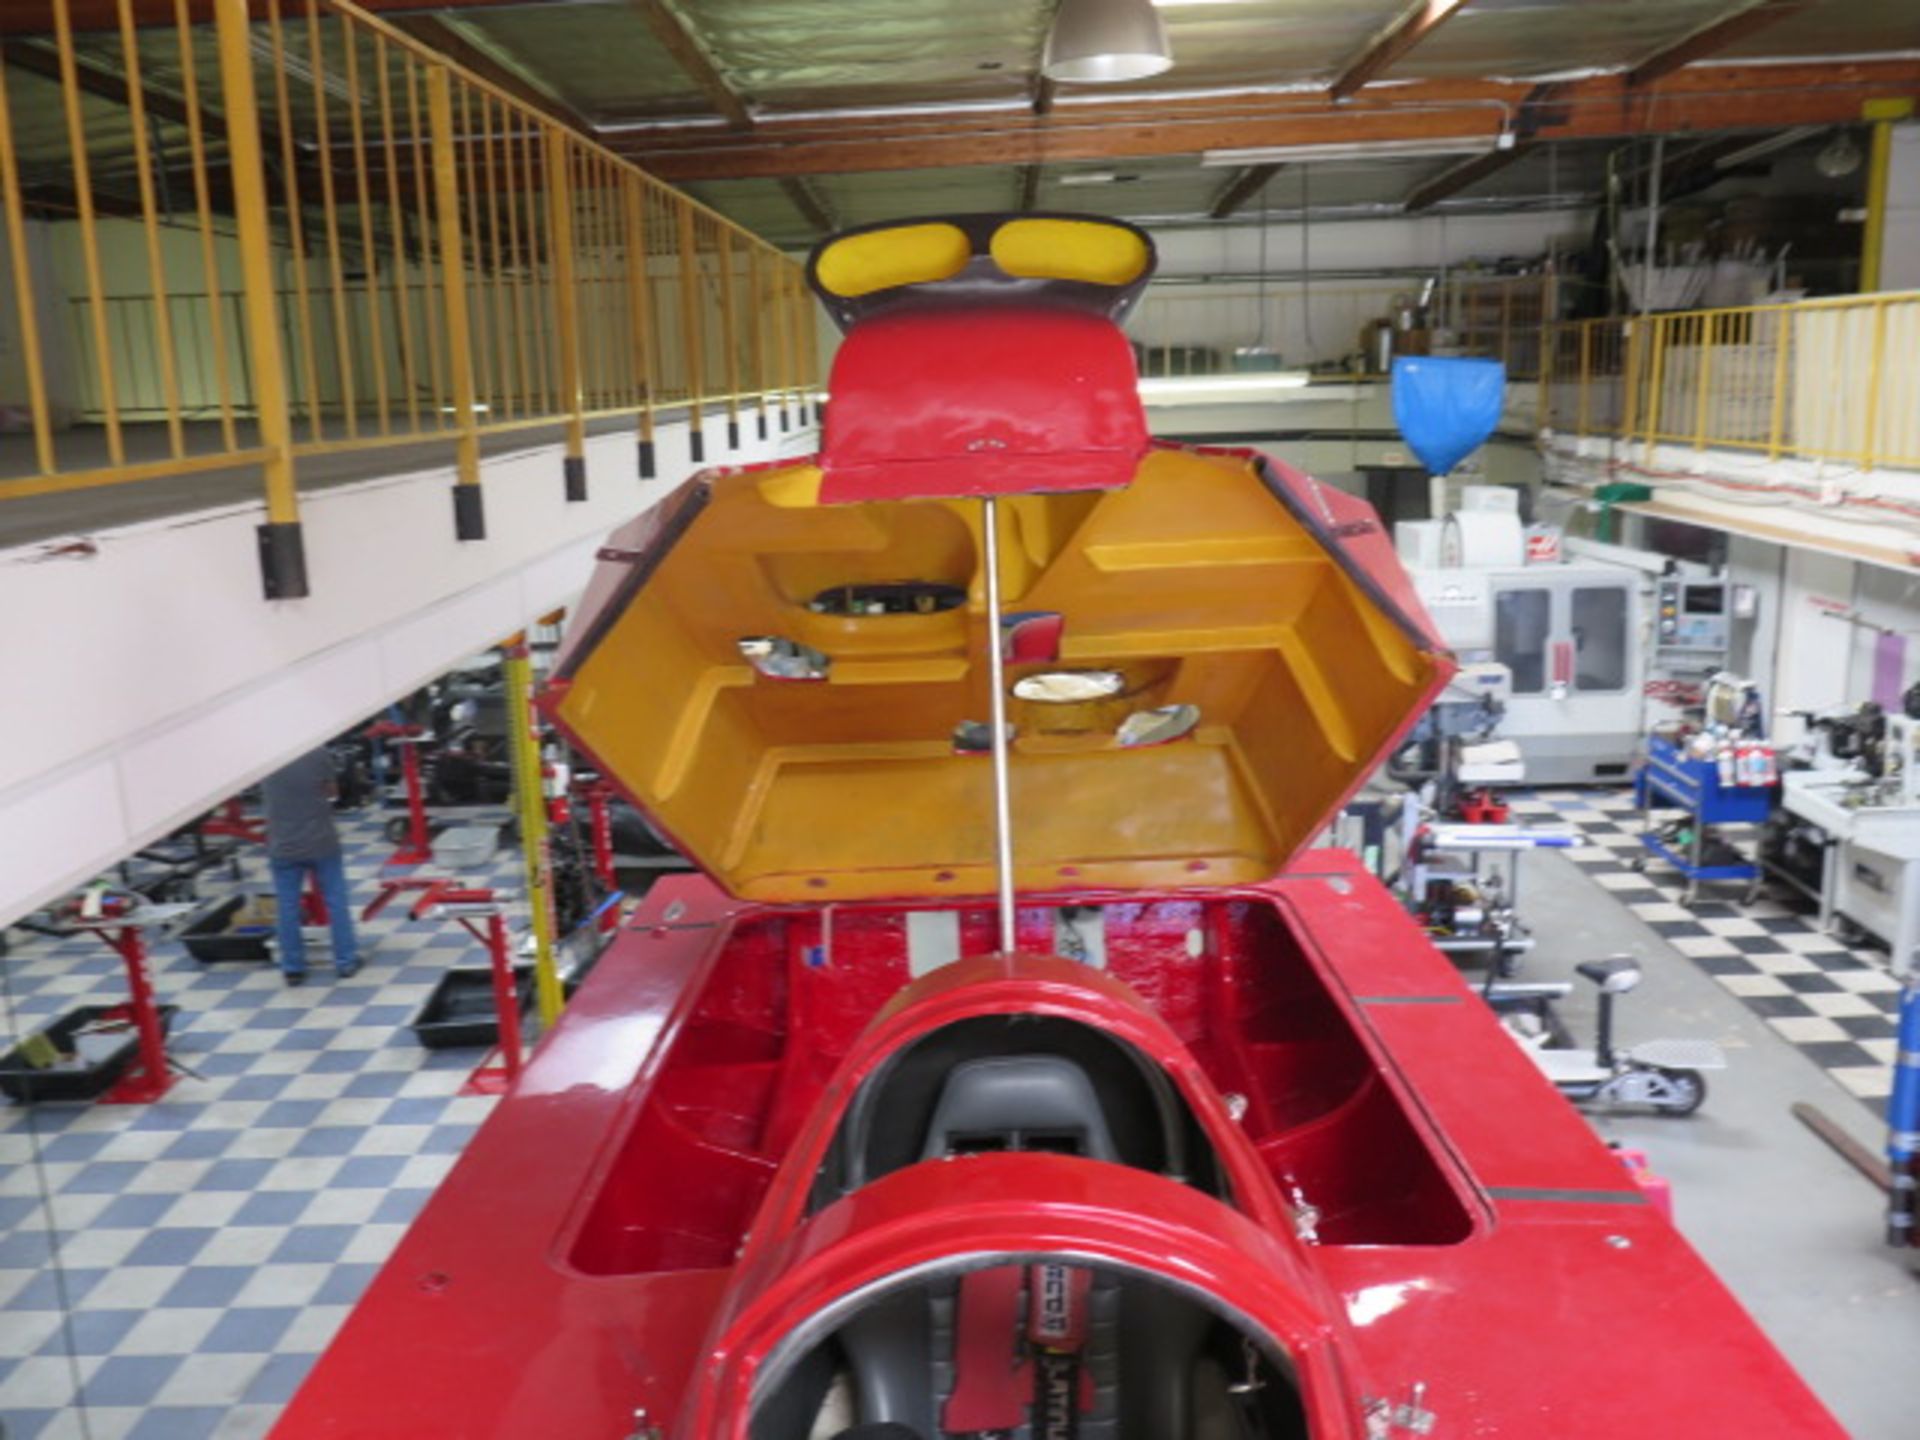 42’ Fountain Super V Race Boat w/ Fill Canopy (Former Worlds Fastest Super V Hull)142.3, SOLD AS IS - Image 28 of 37